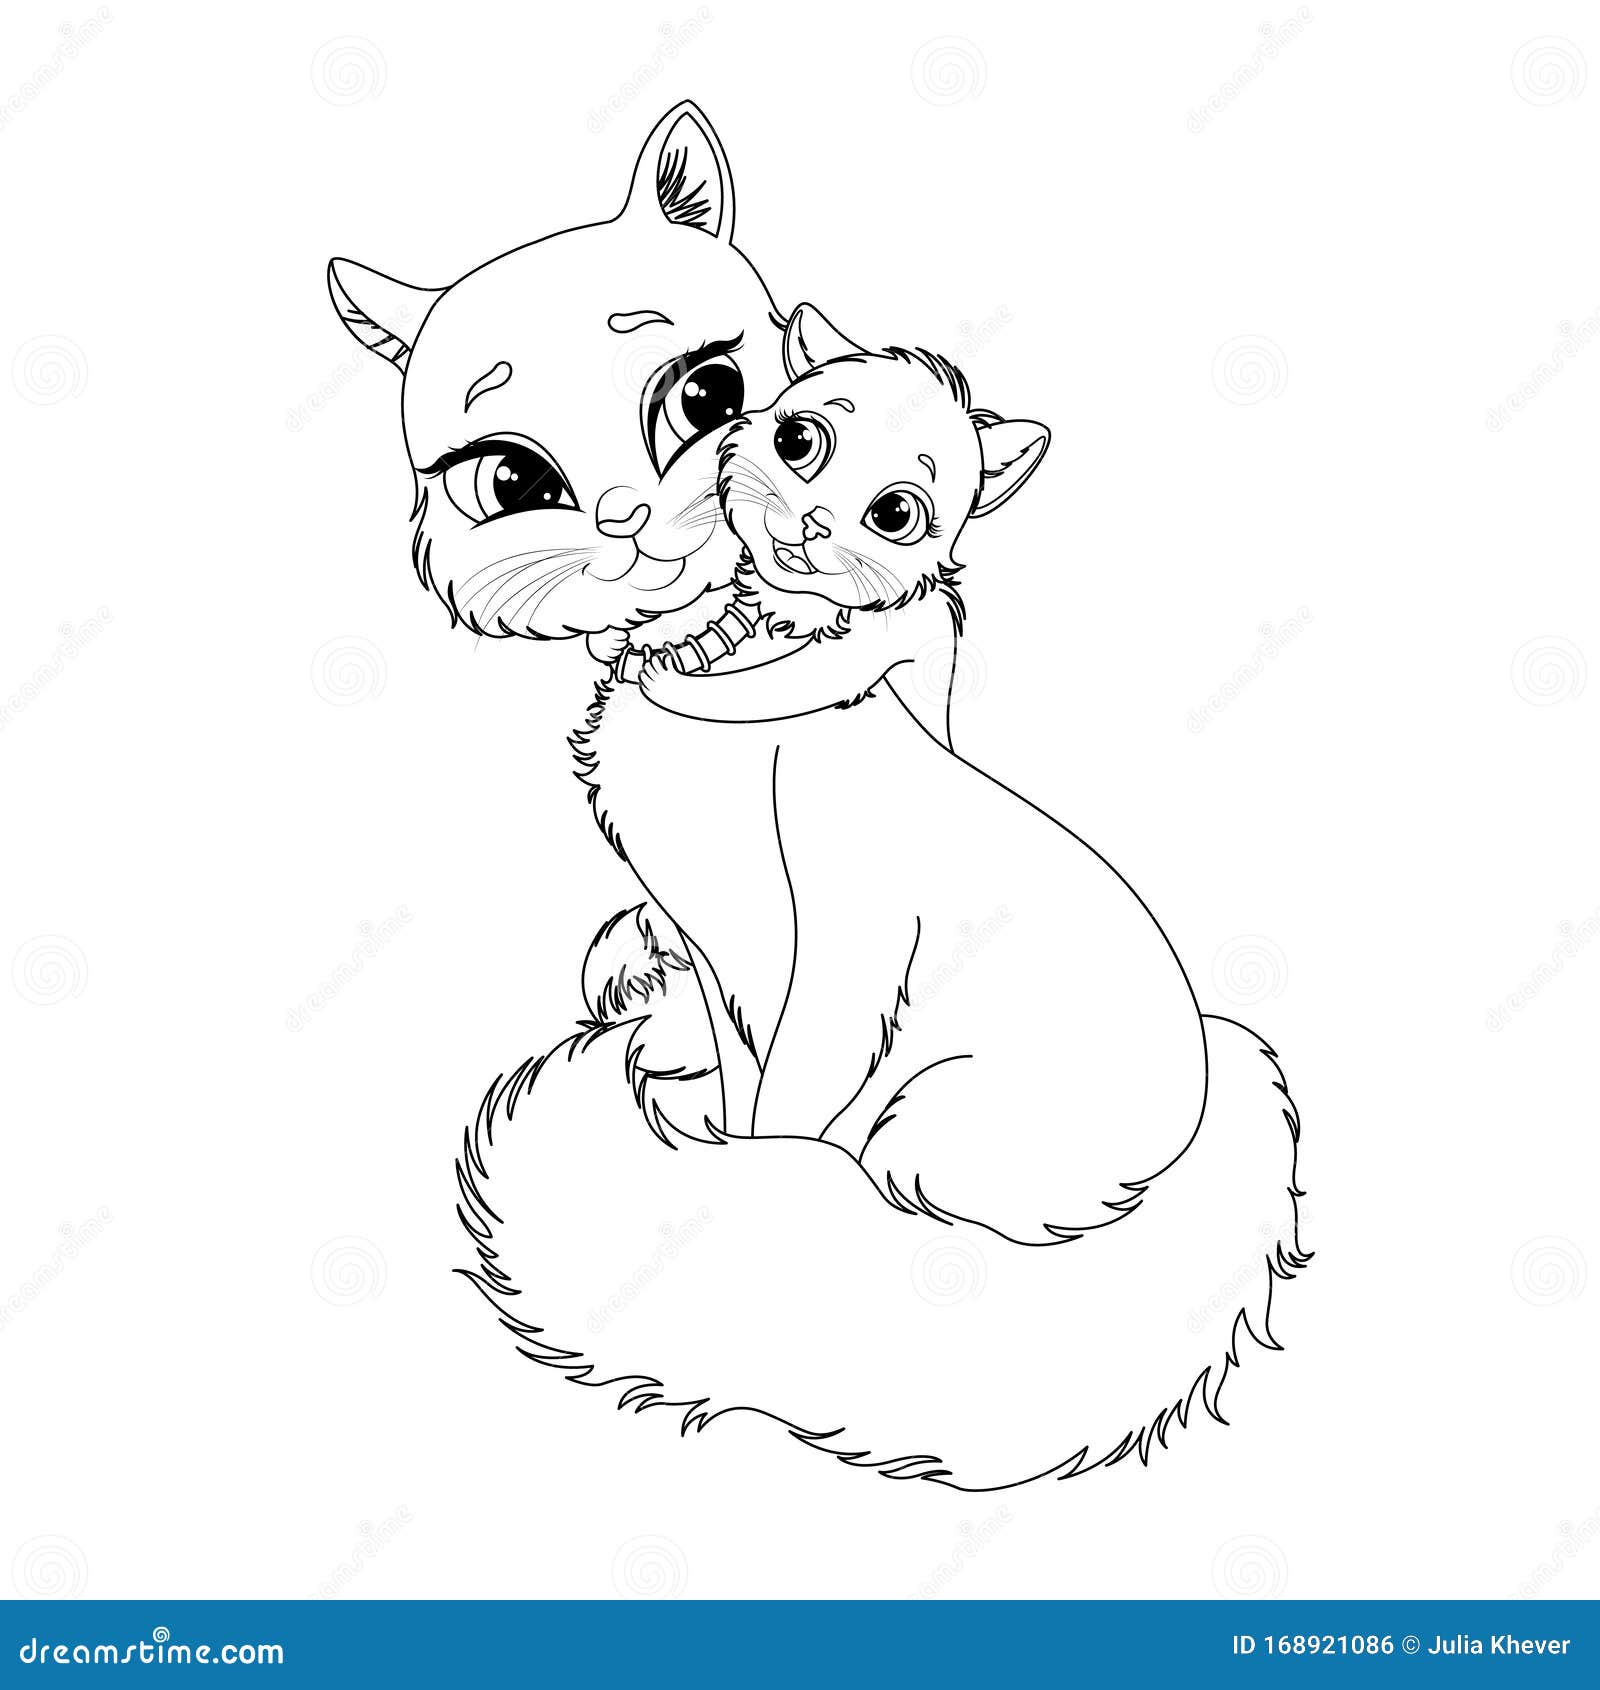 Coloring page for kids with cute mother cat and its charming kitten stock vector